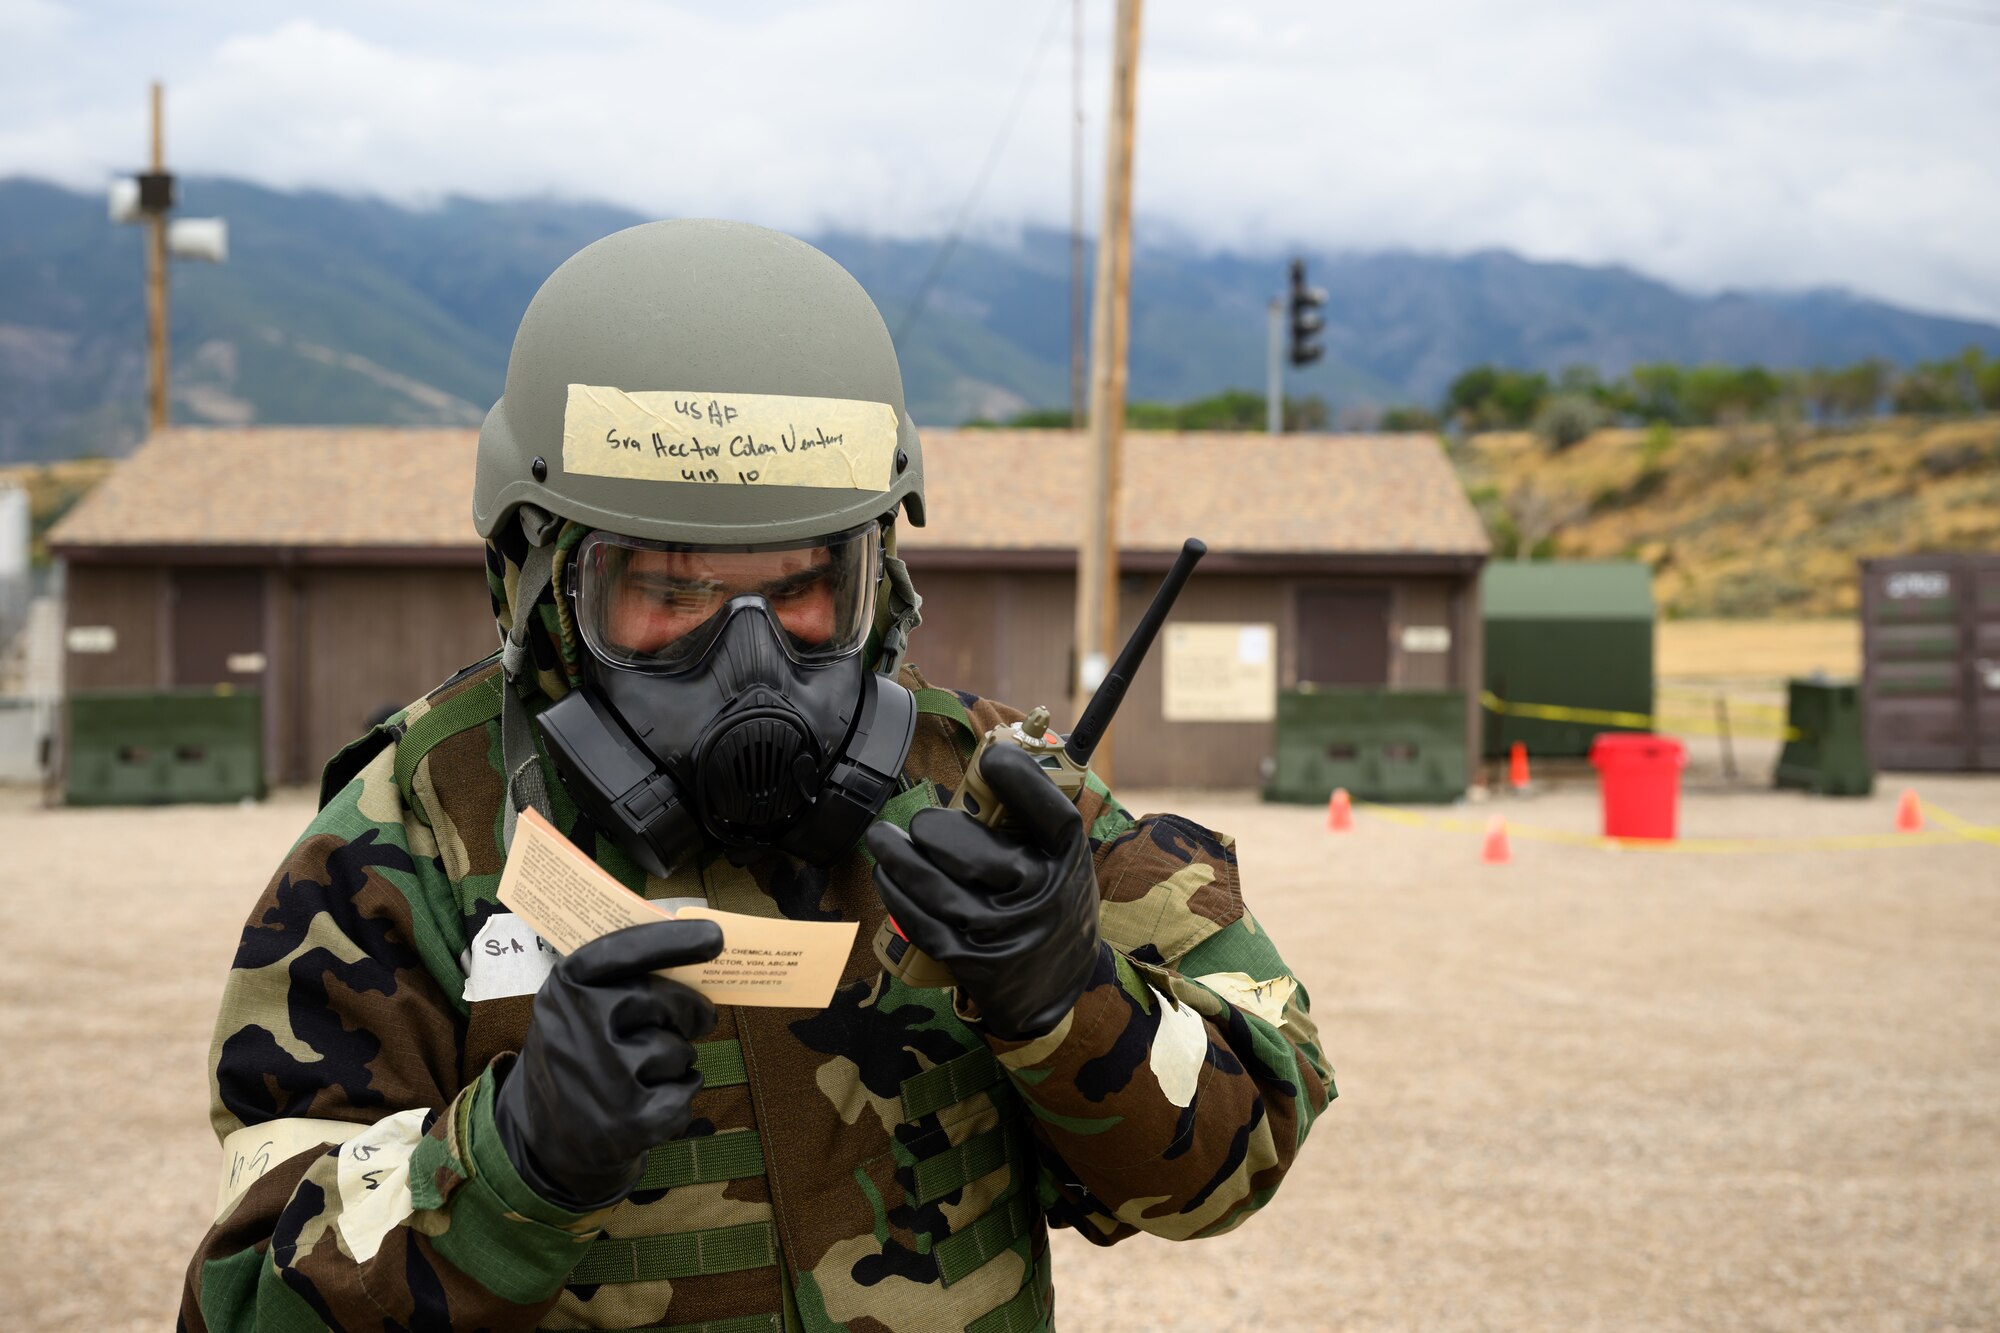 Senior Airman Hector Colon Ventura, 75th Logistics Readiness Squadron, reports a simulated chemical agent detection during a Phase 2 exercise at Hill Air Force Base, Utah, Sept. 14, 2022.